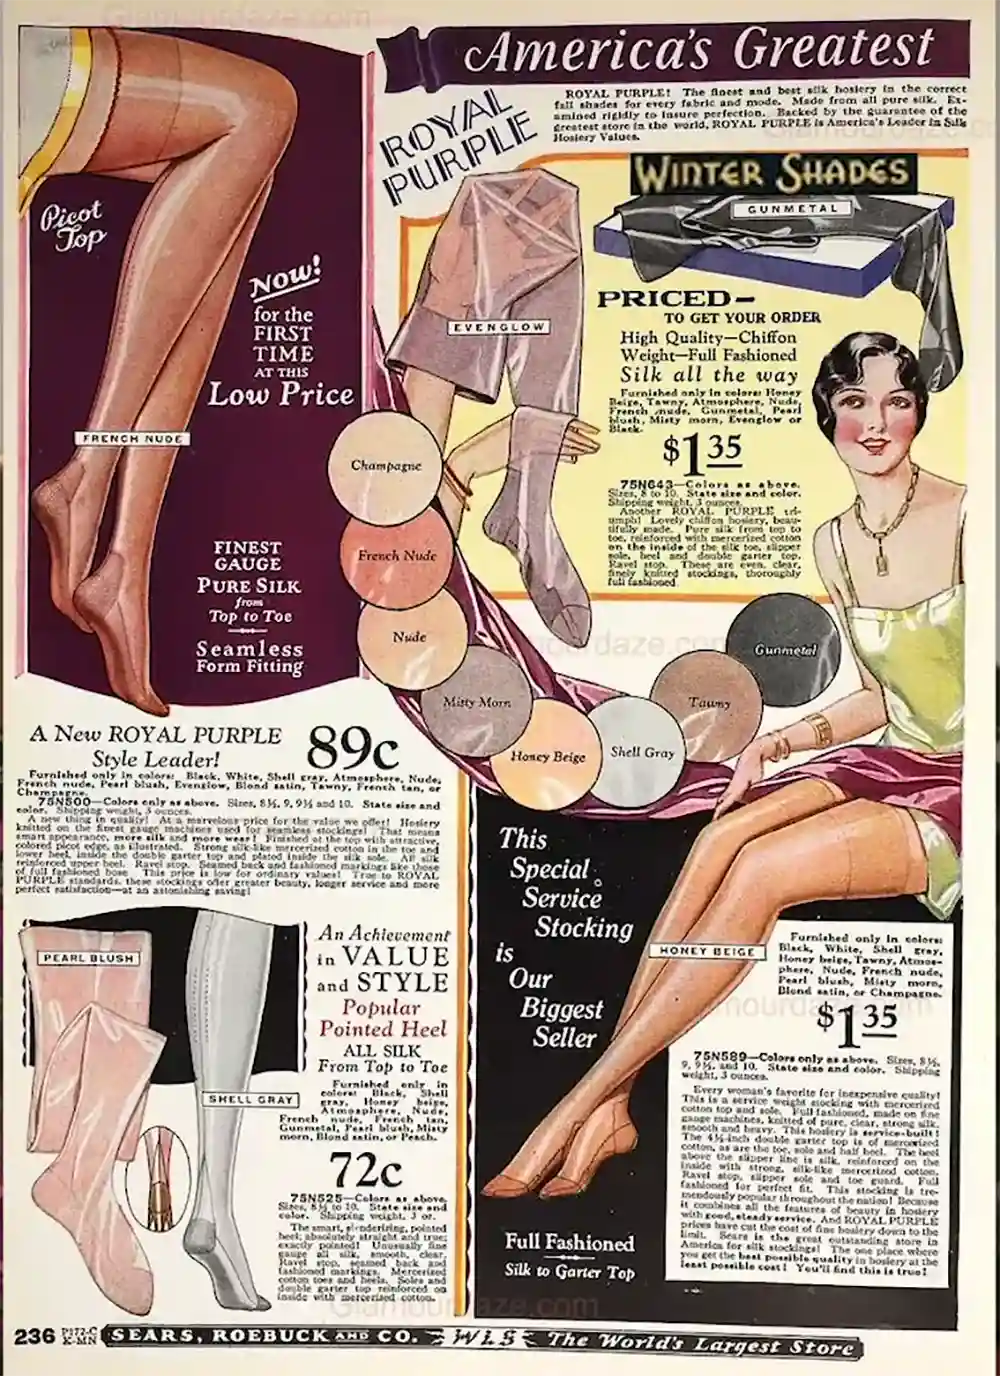 Old advertisement about girls' stockings